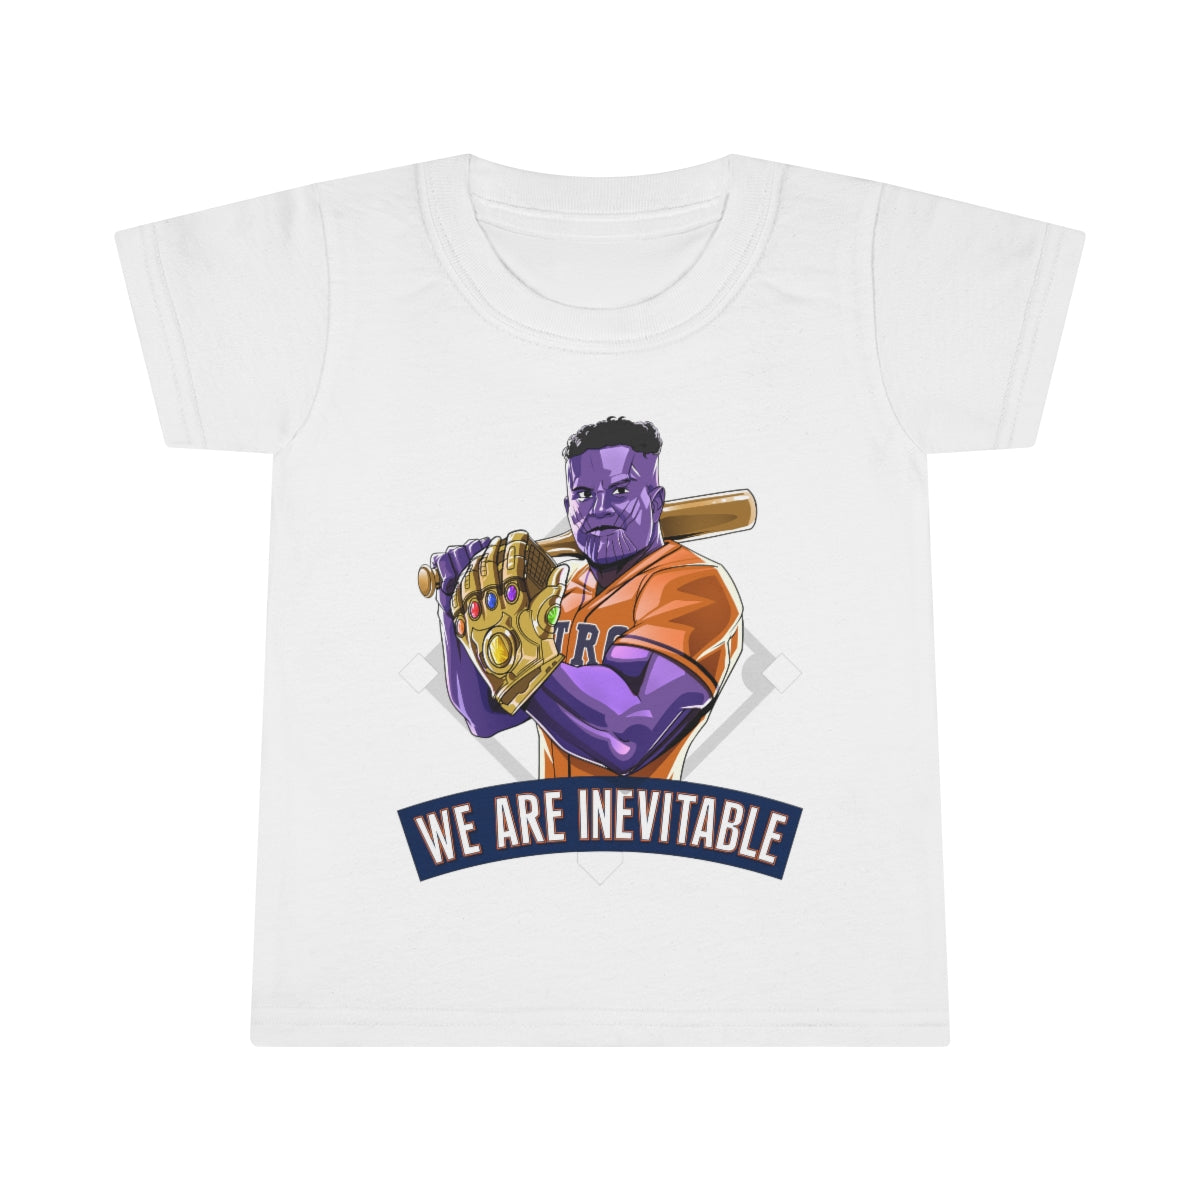 Destiny Arrives All The Same - Toddler Tee White / 2T Kids Clothes